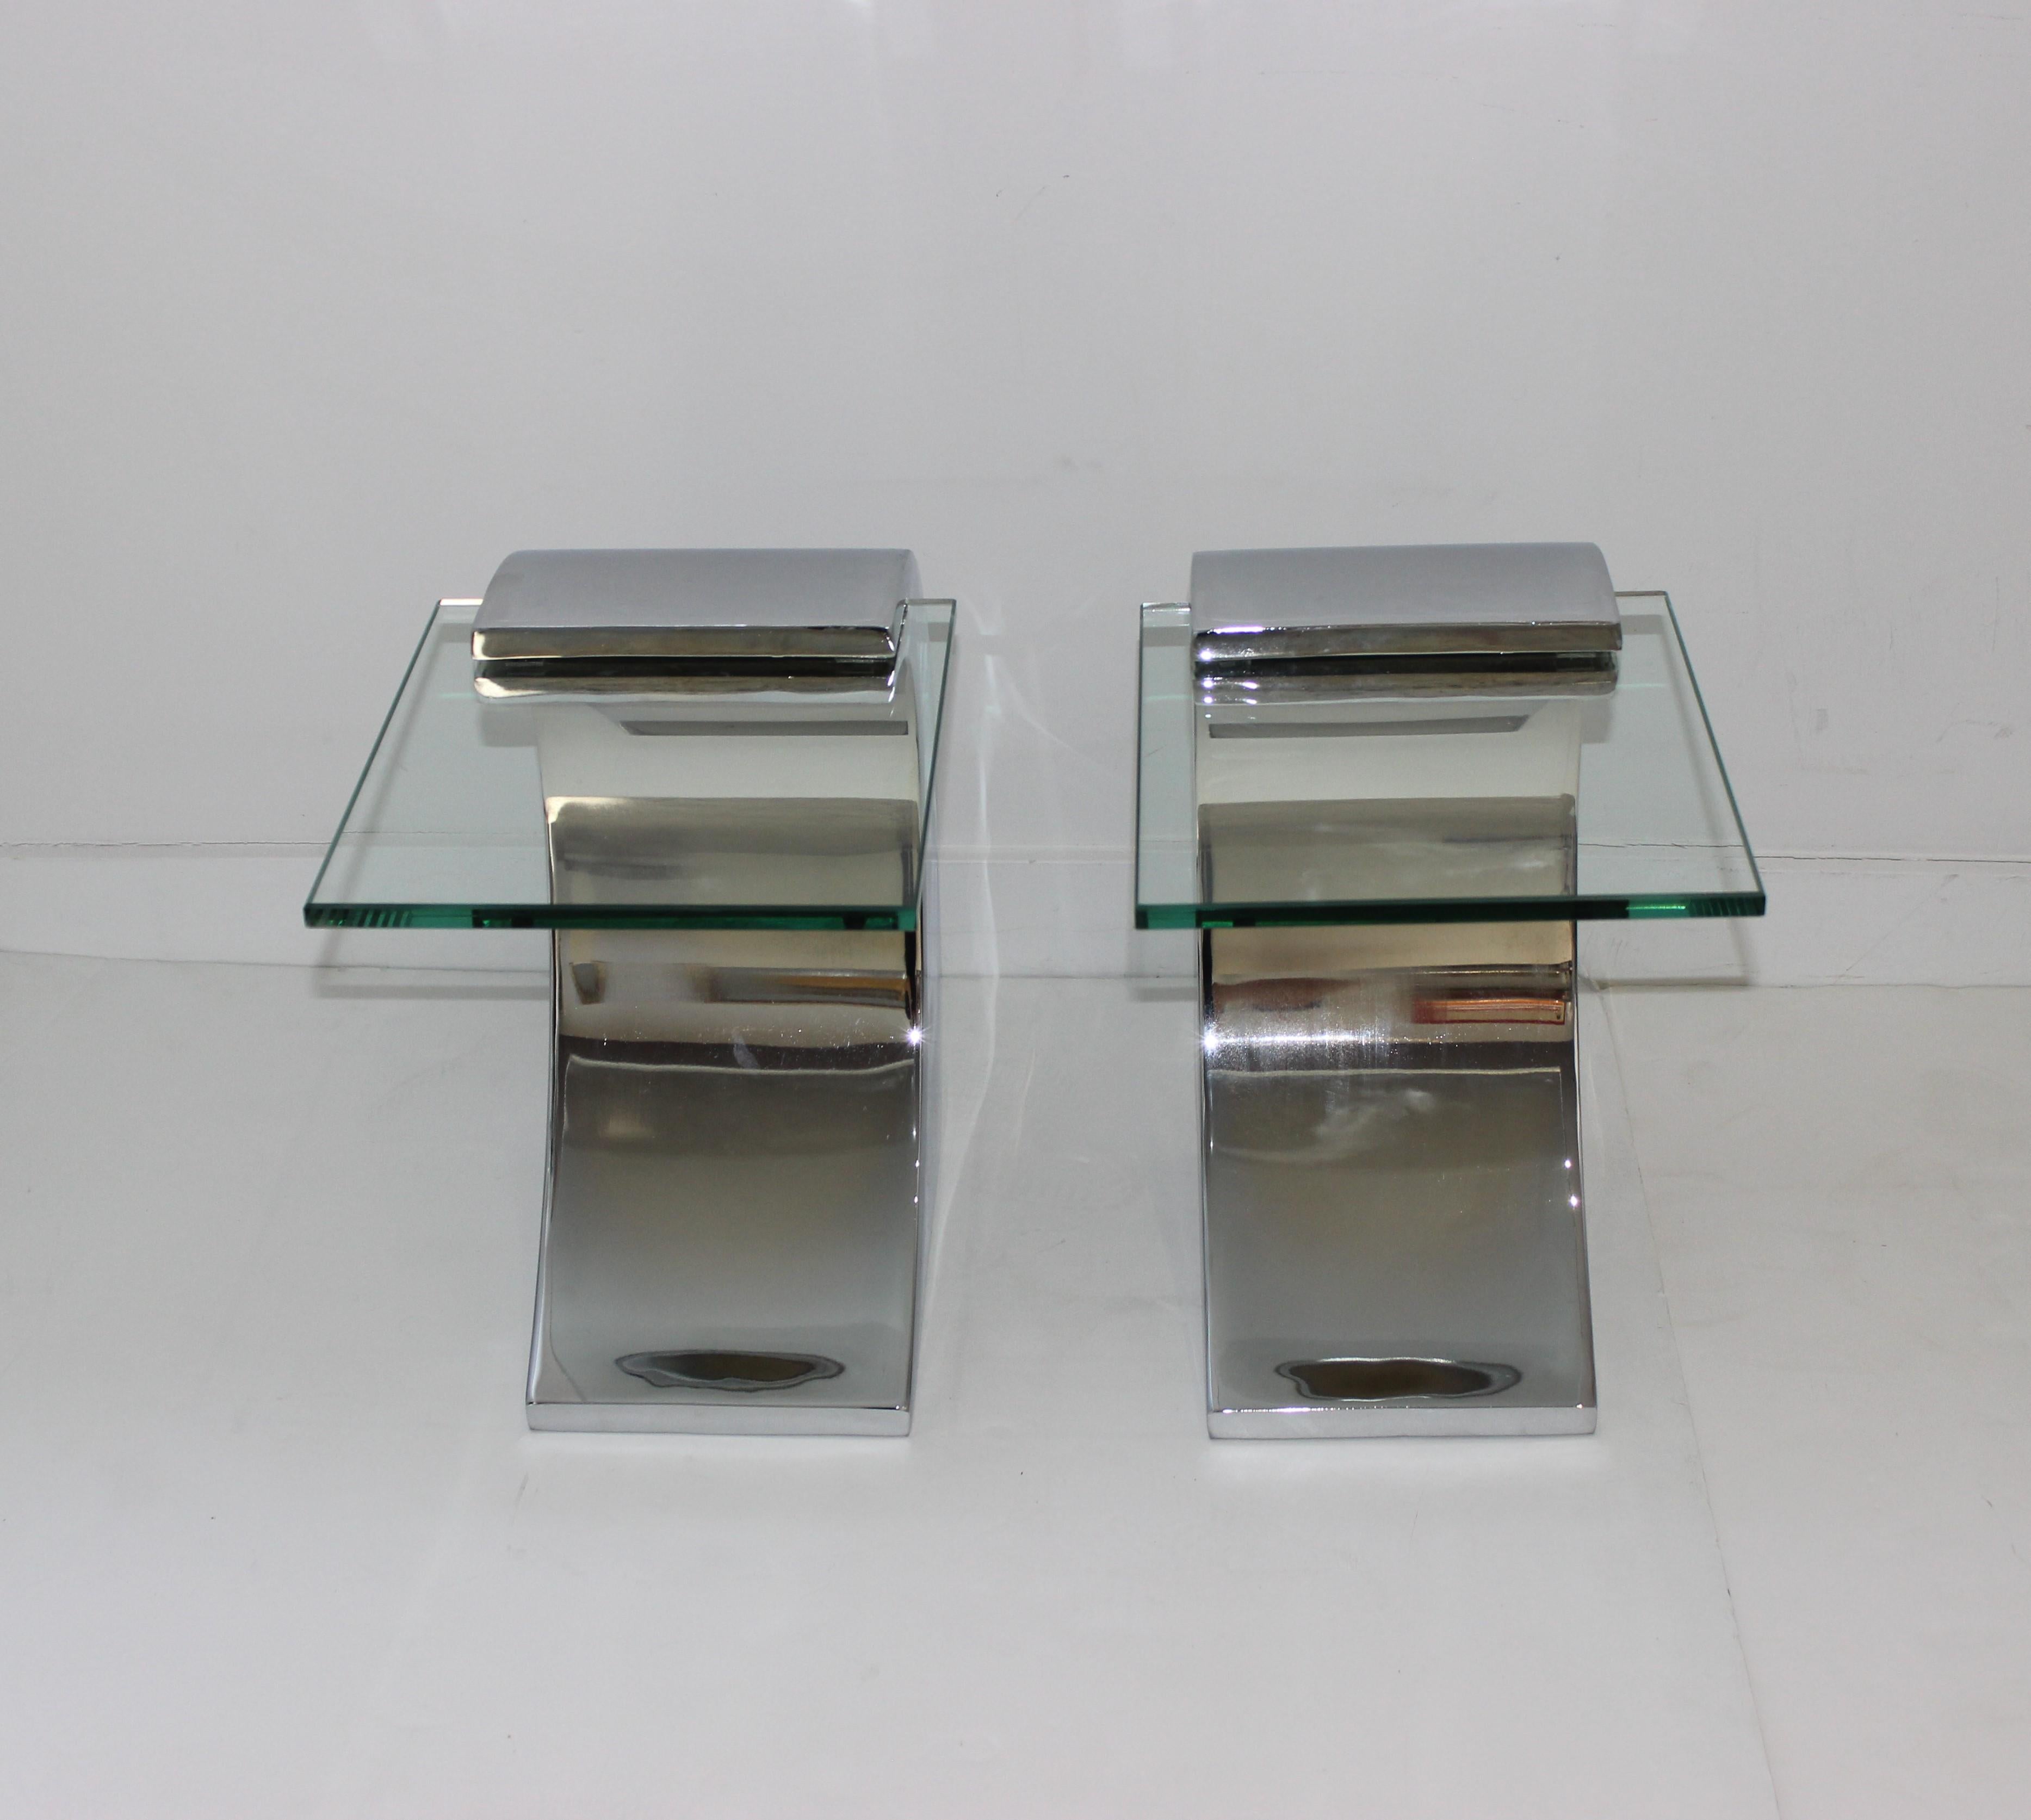 This stylish set of cantilevered side tables are fabricated in stainless steel and glass and were acquired from a South Beach, Miami estate.

Note: Glass is 10 inches wide x 12